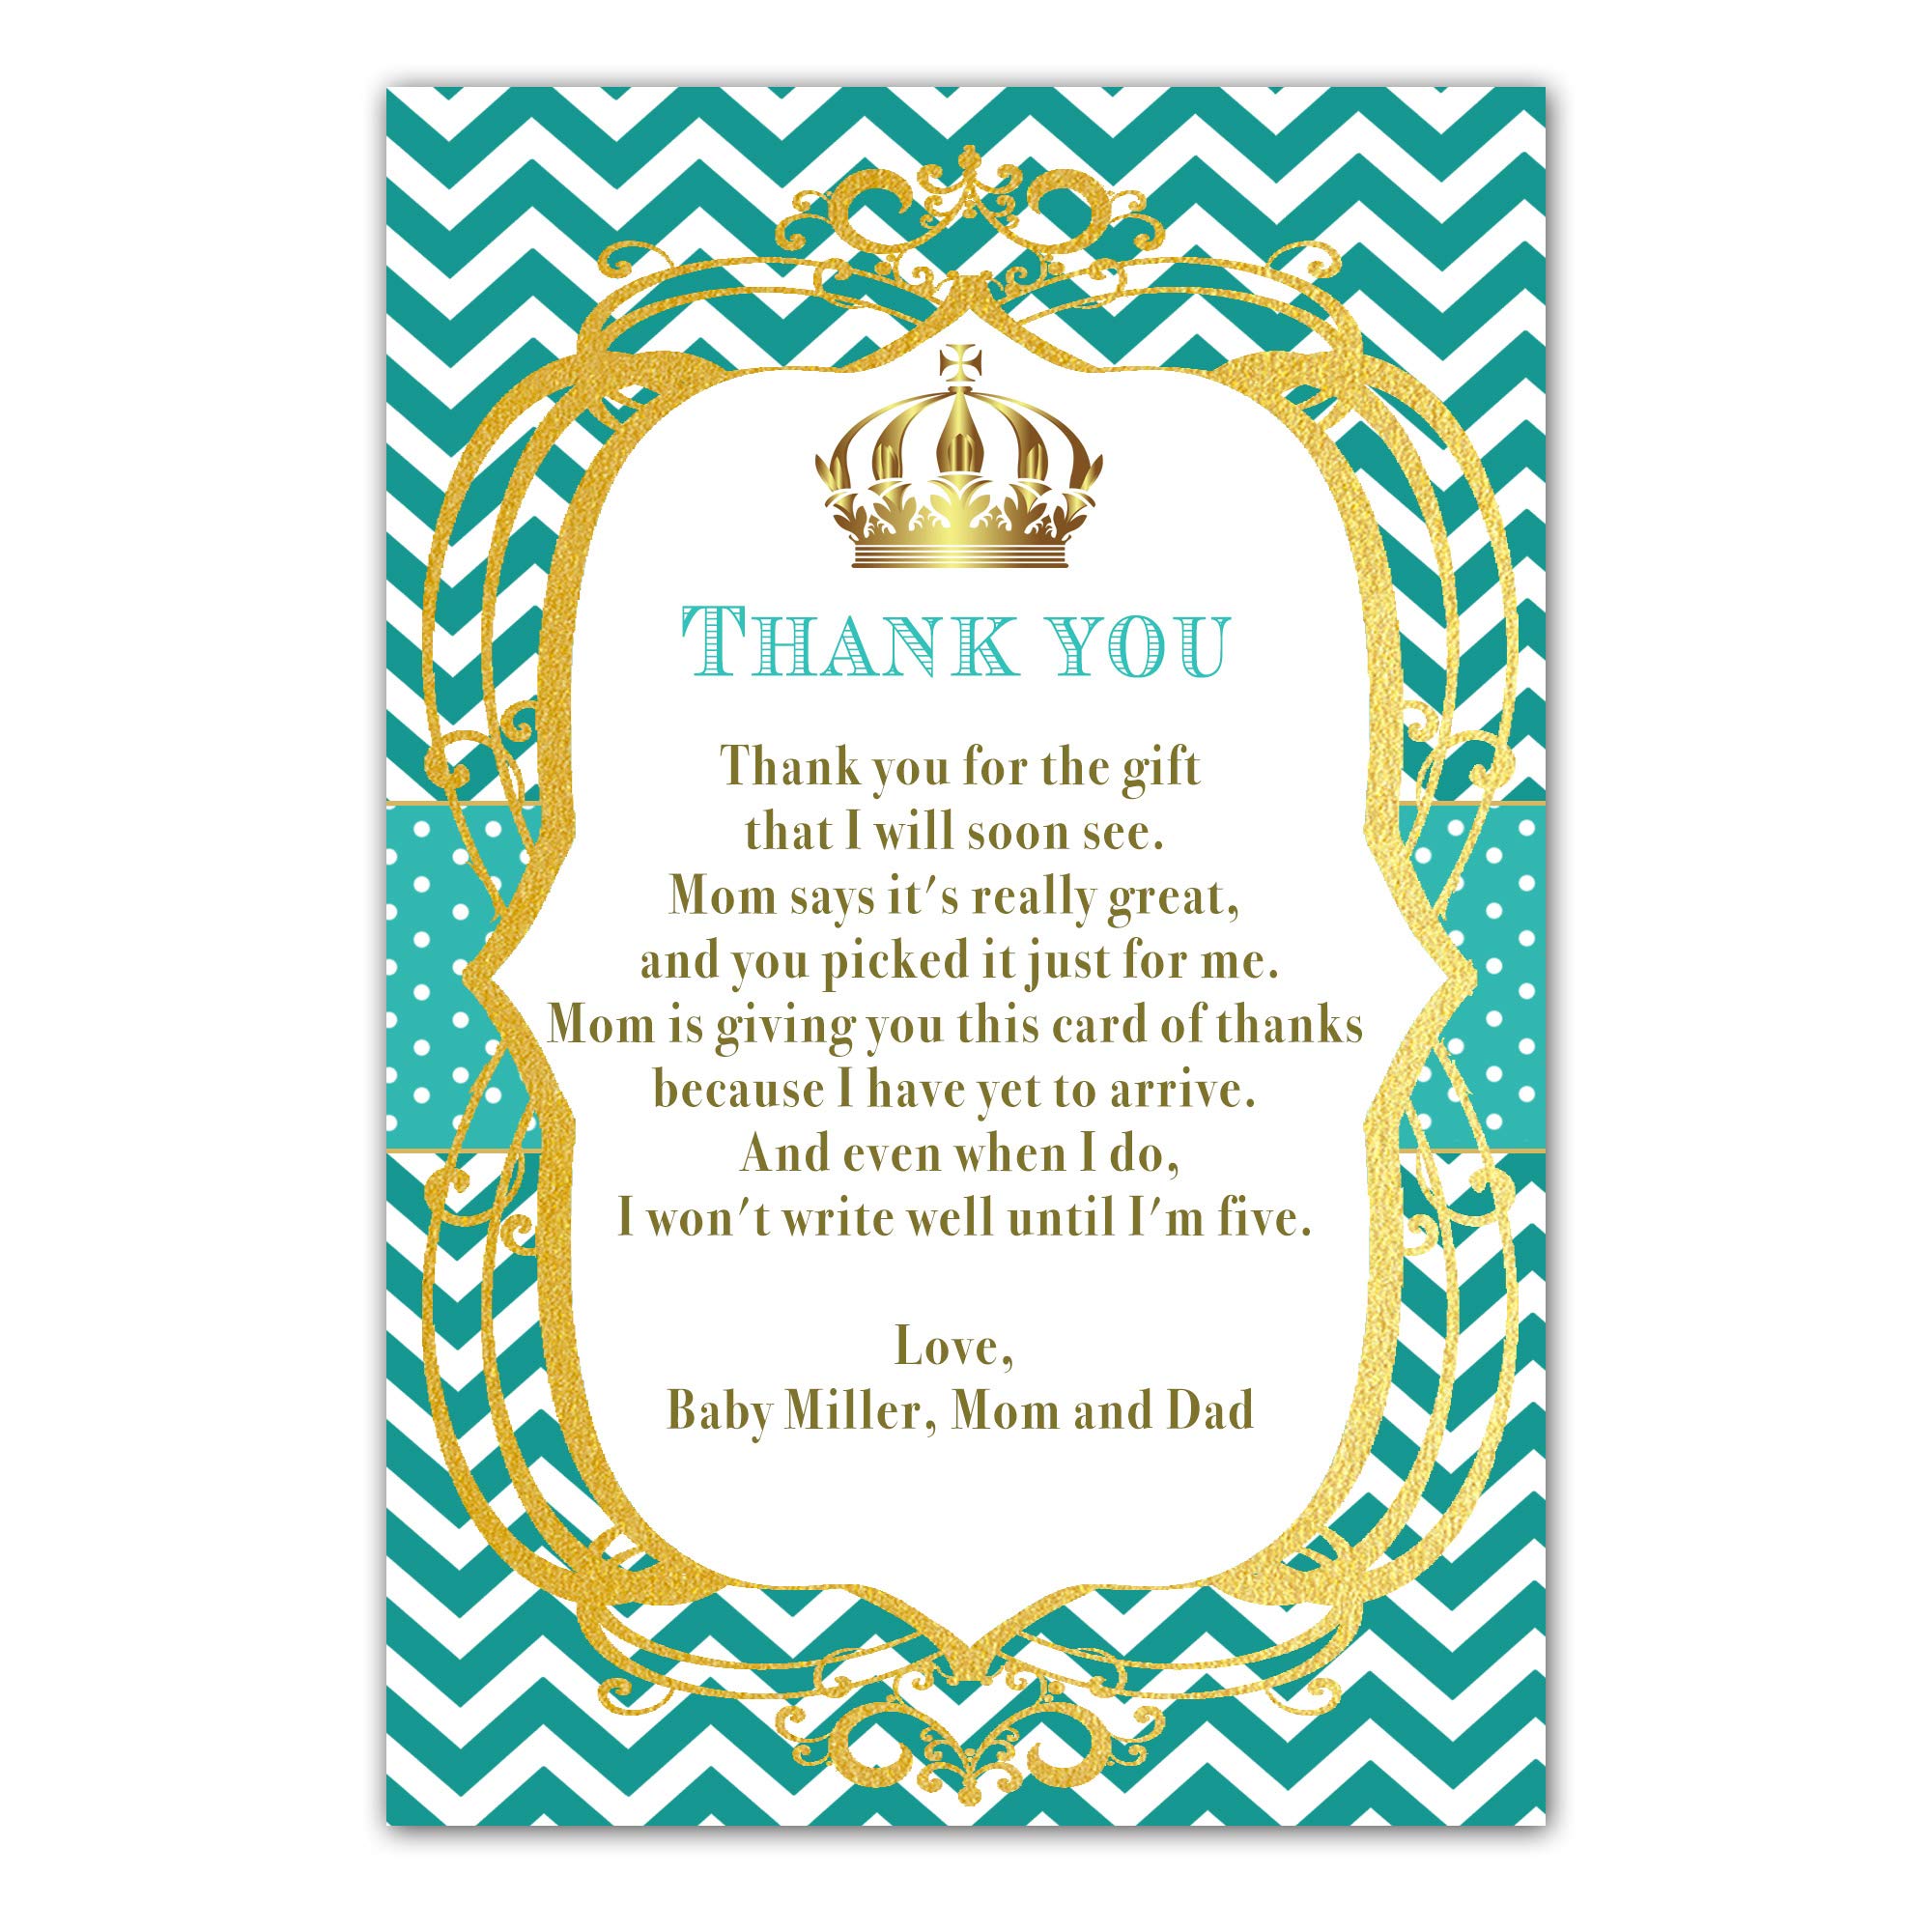 30 Thank You Cards Prince Princess Baby Shower Teal Photo Paper